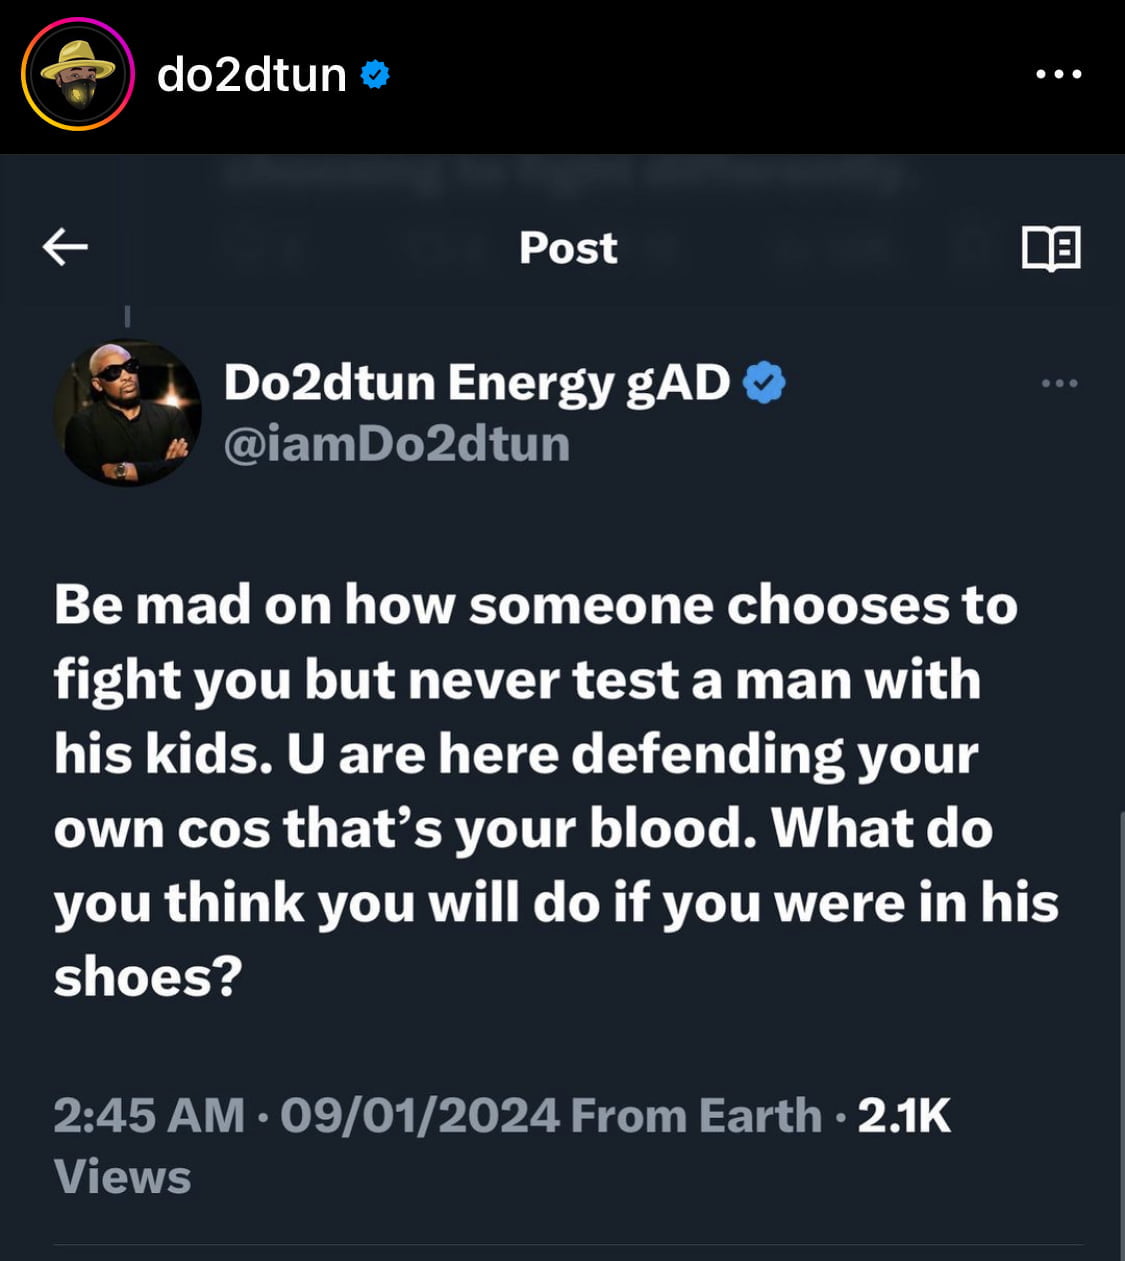 Do2dtun commentary on testing a man with his kids